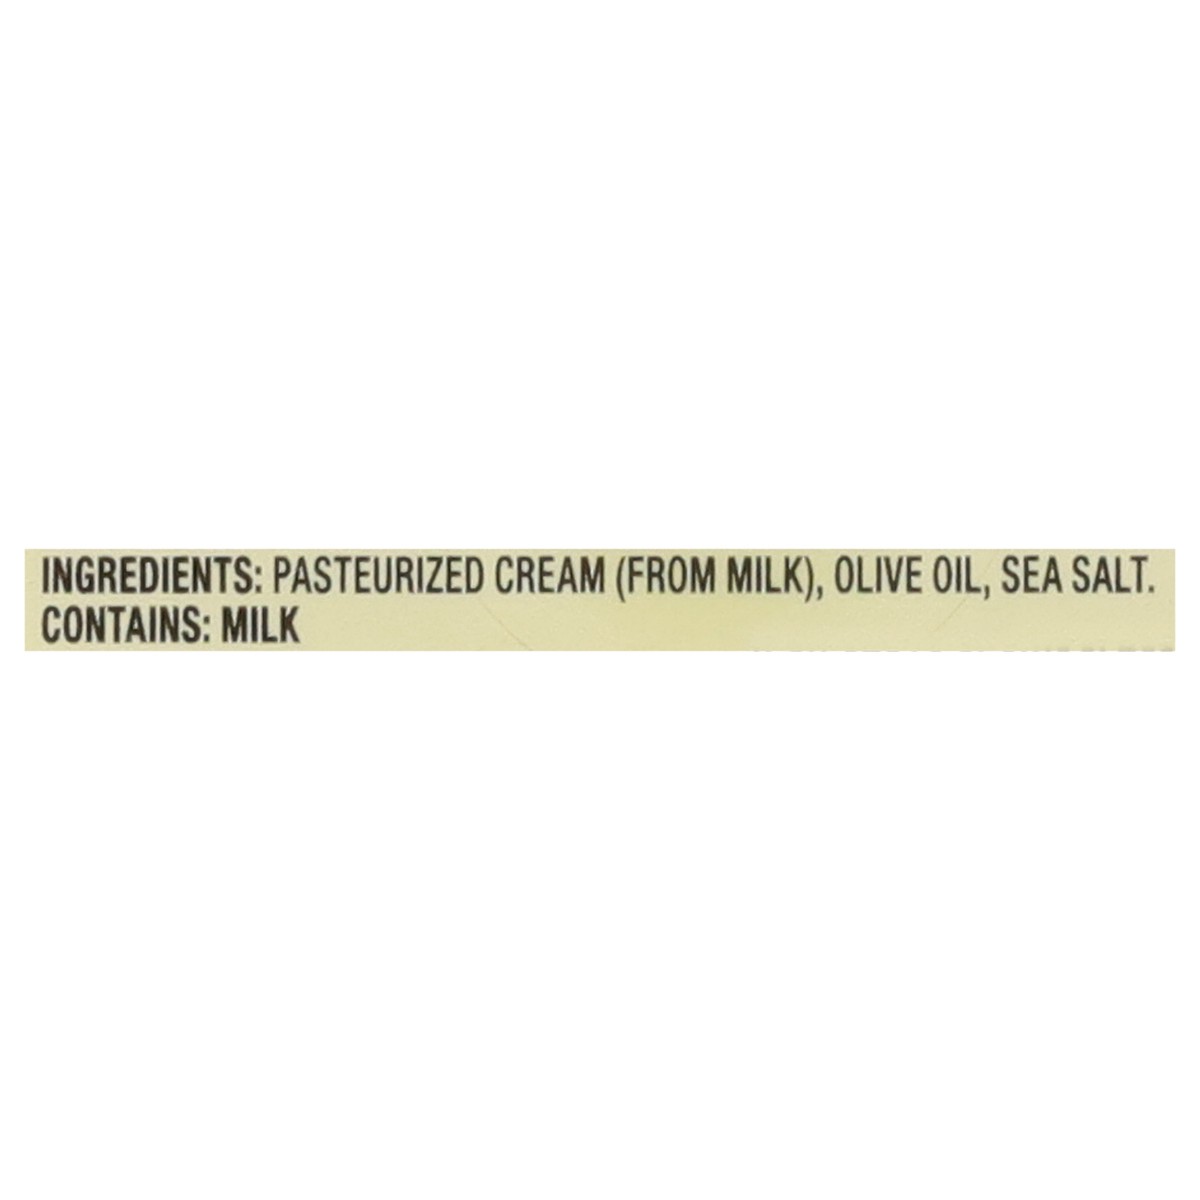 slide 6 of 13, Challenge Spreadable Sea Salted Butter with Olive Oil 13 oz, 13 oz